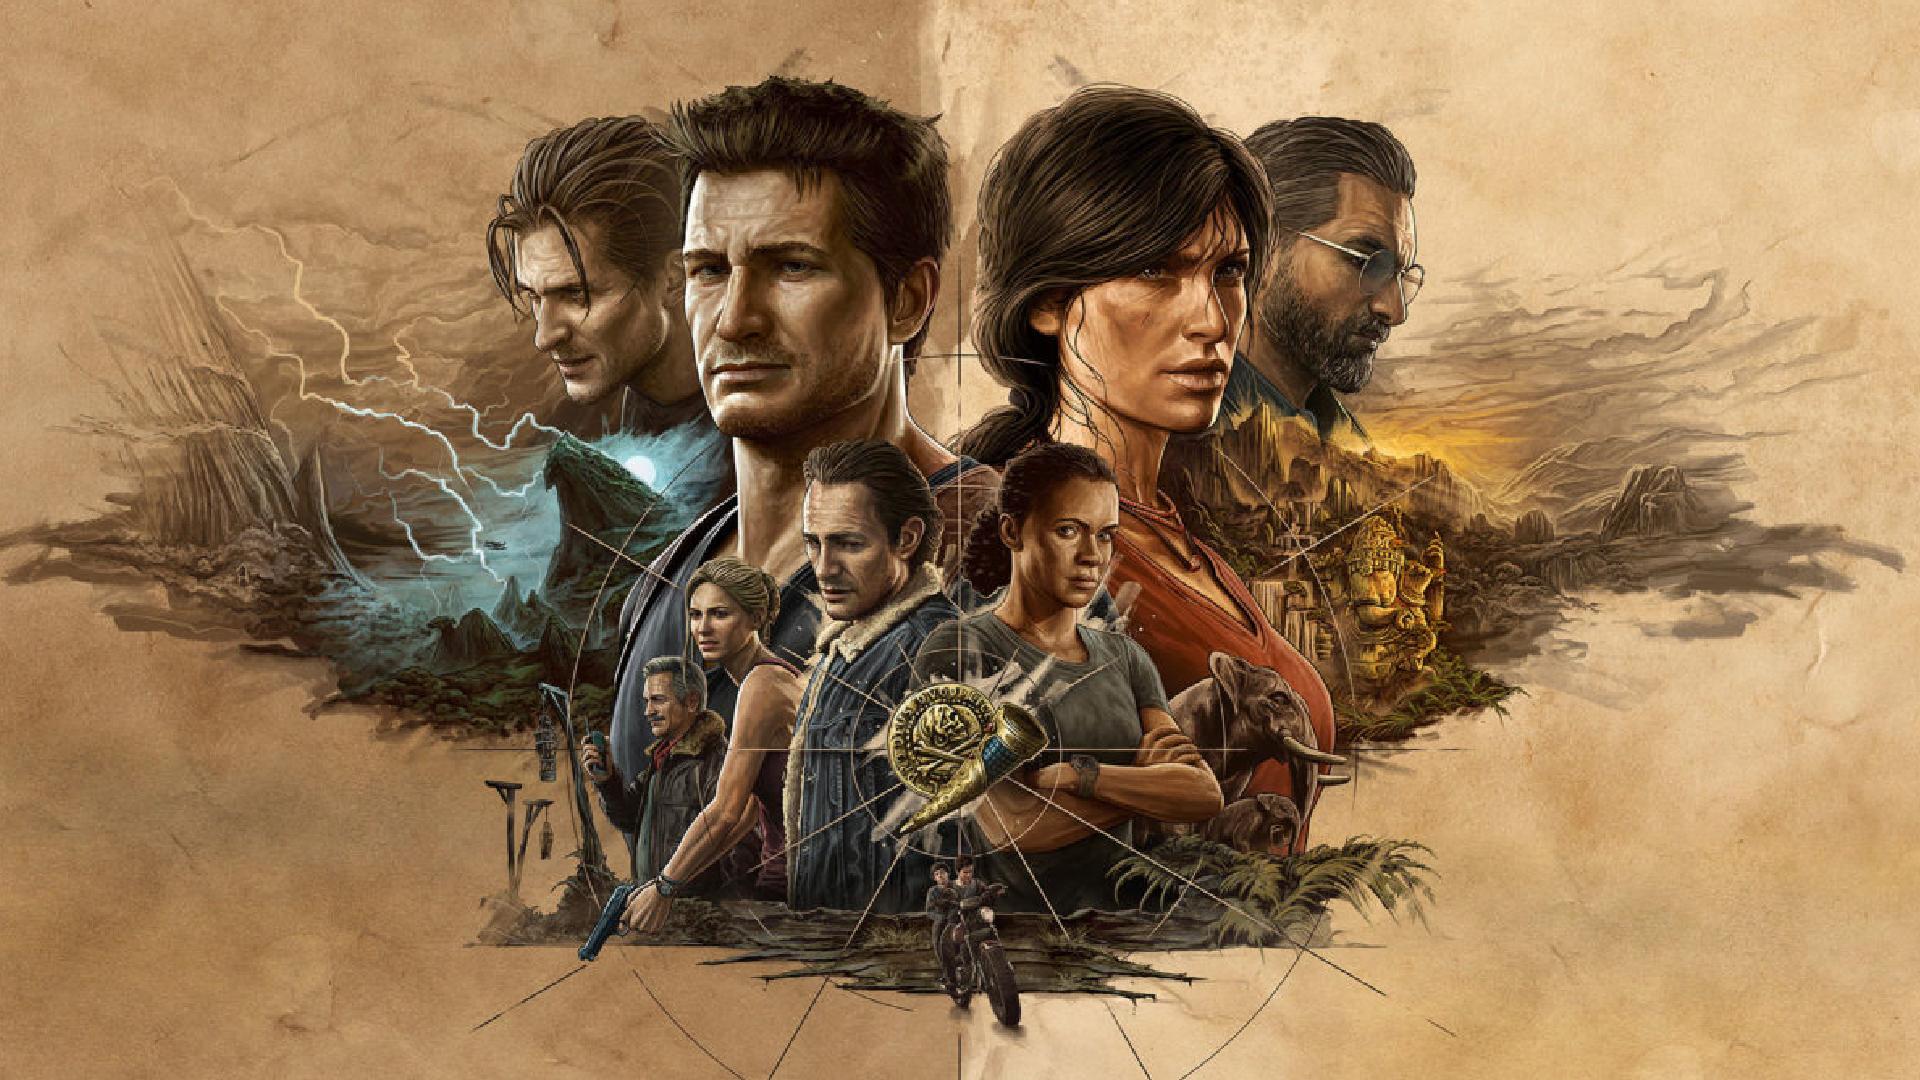 Is Uncharted's Nathan Drake a Bad Guy? – GameSpew